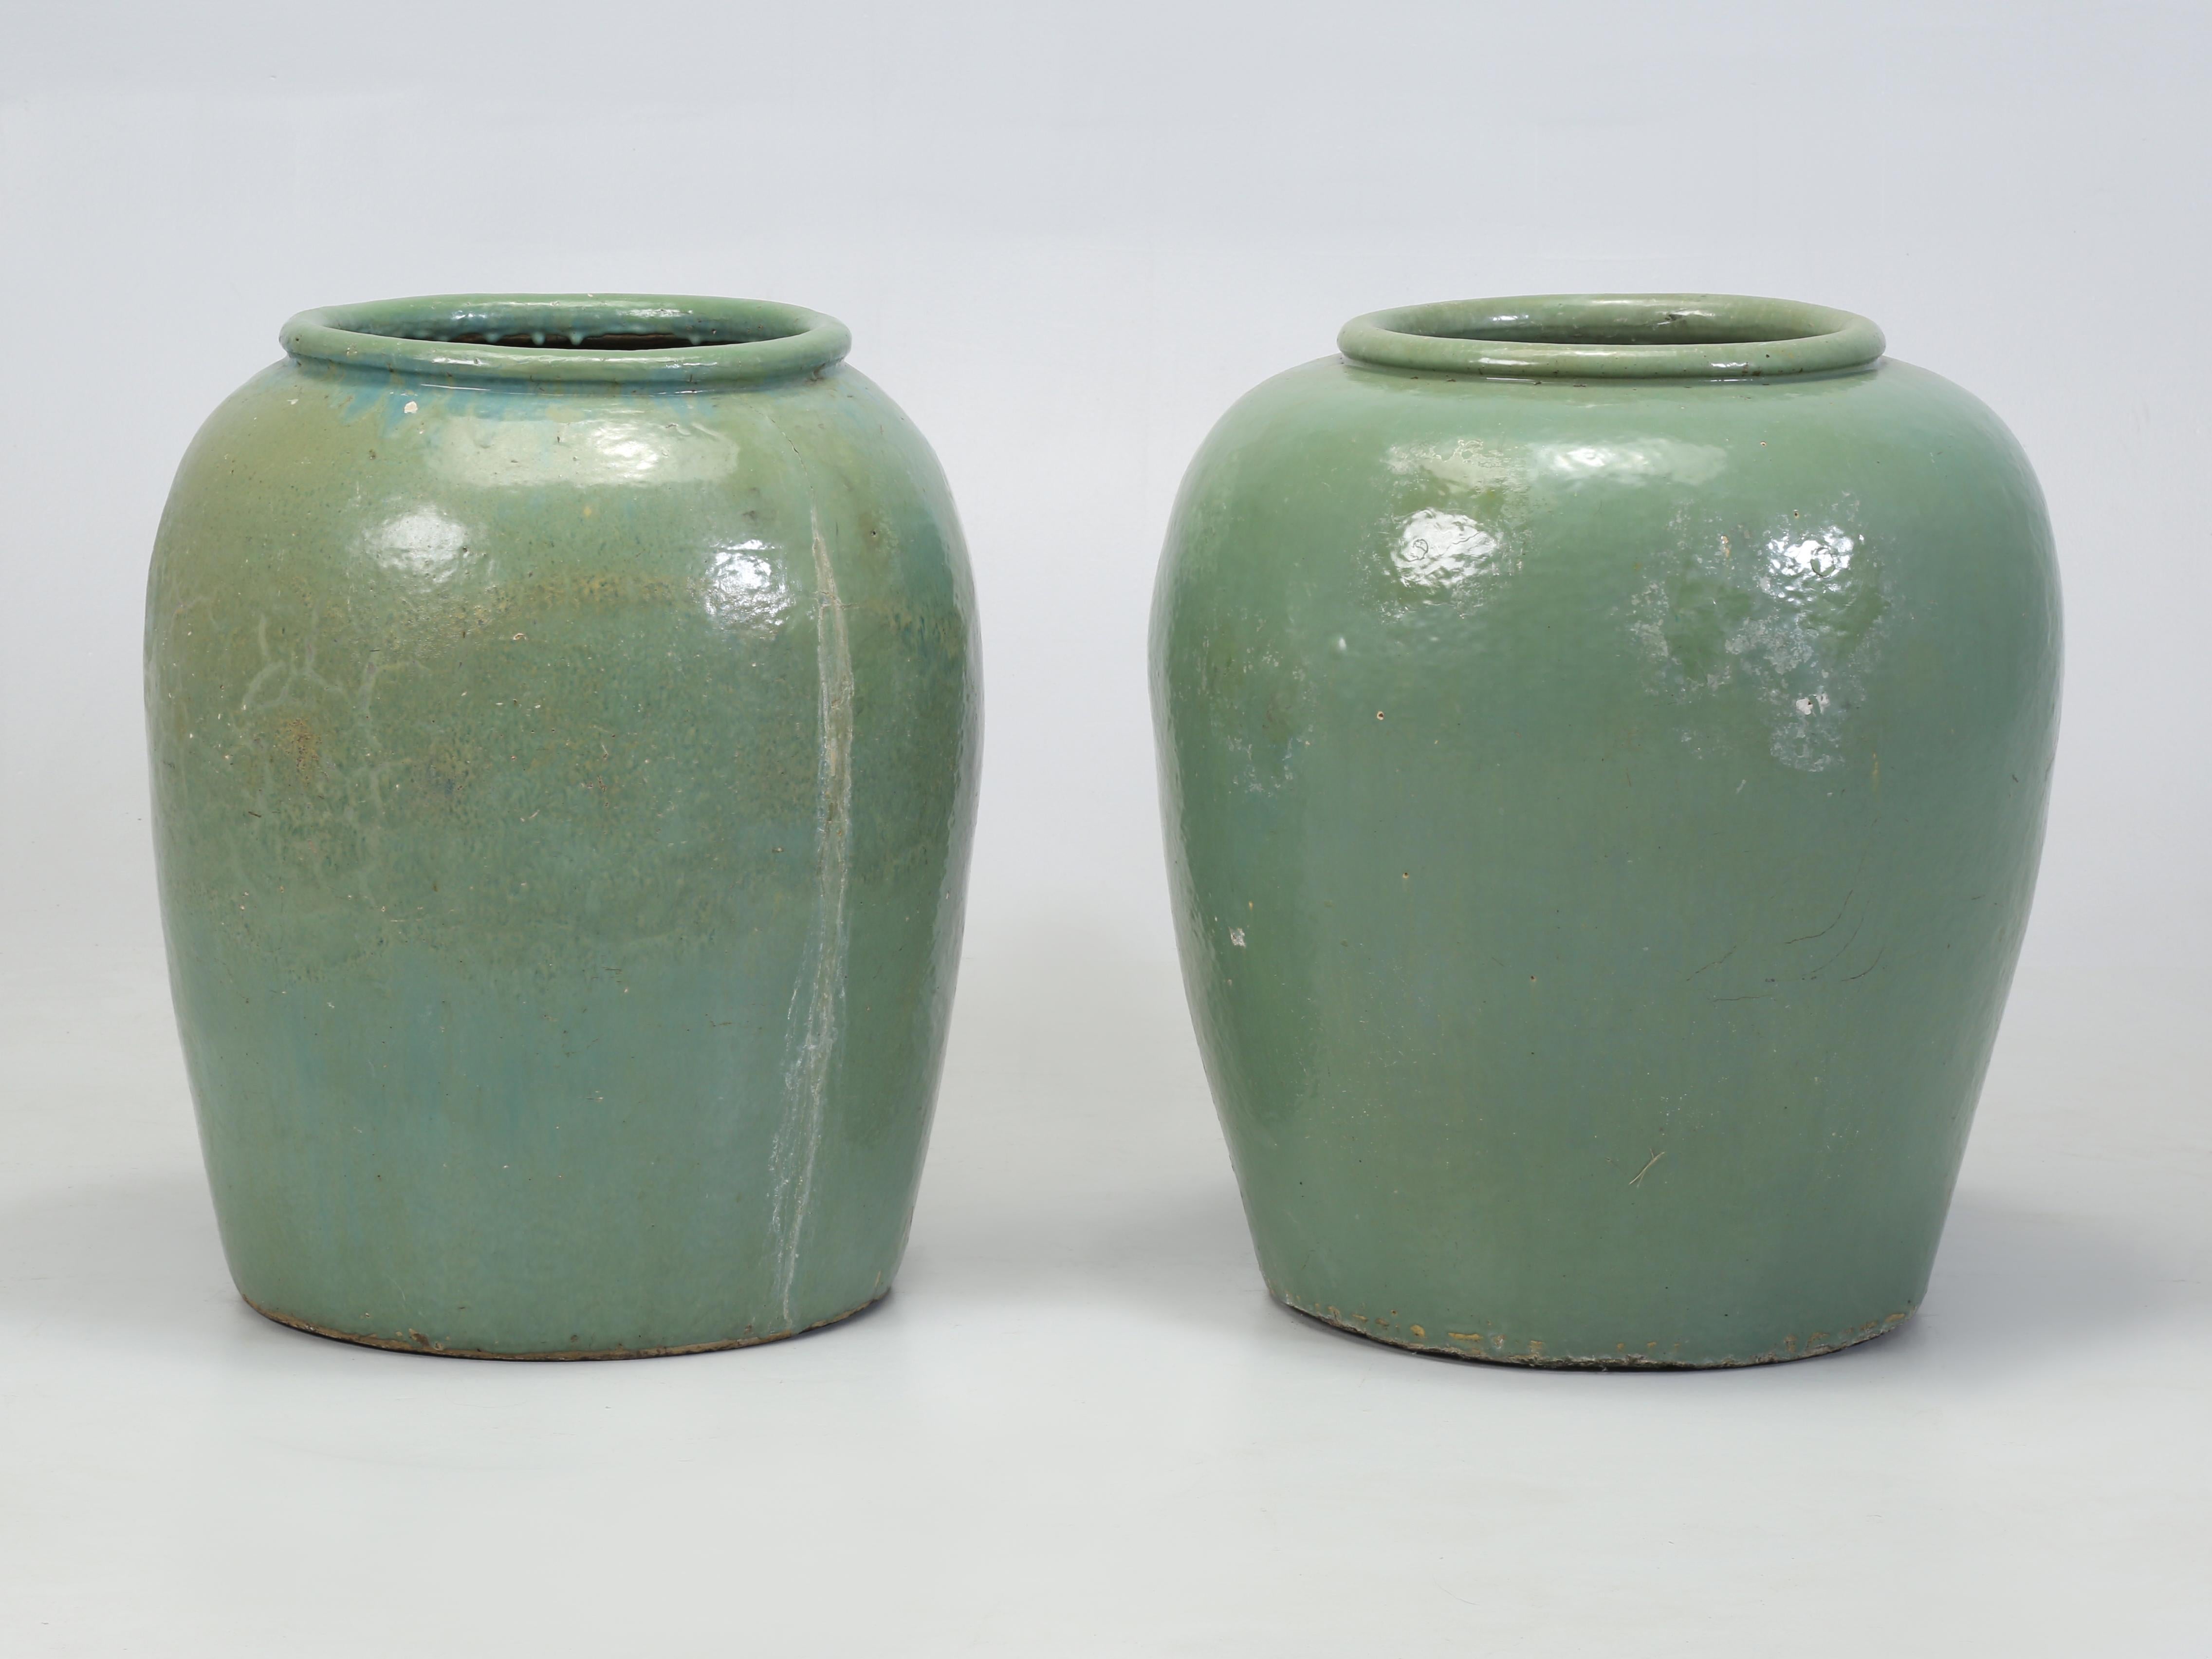 Unknown Glazed Green Vintage Garden Planters Imported from Ireland We'd call a Near Pair